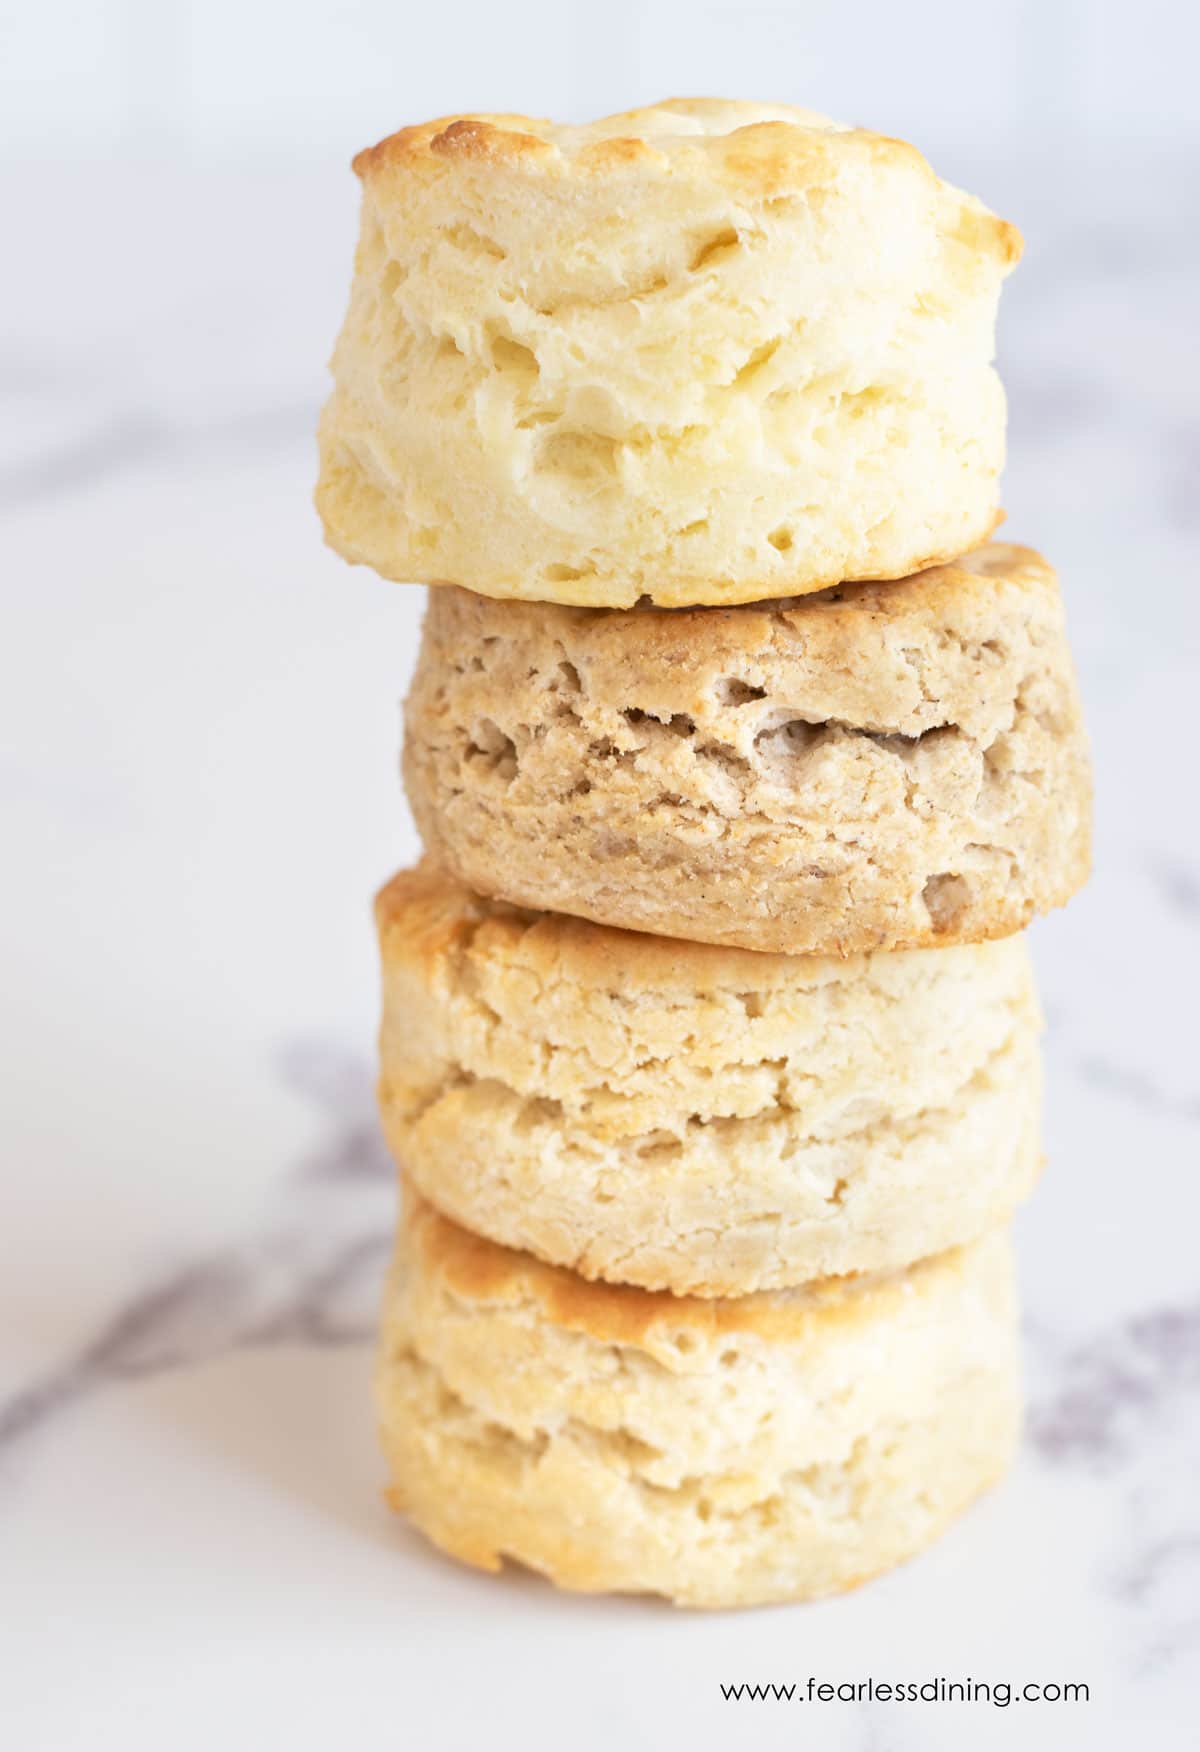 A stack of four gluten free biscuits.